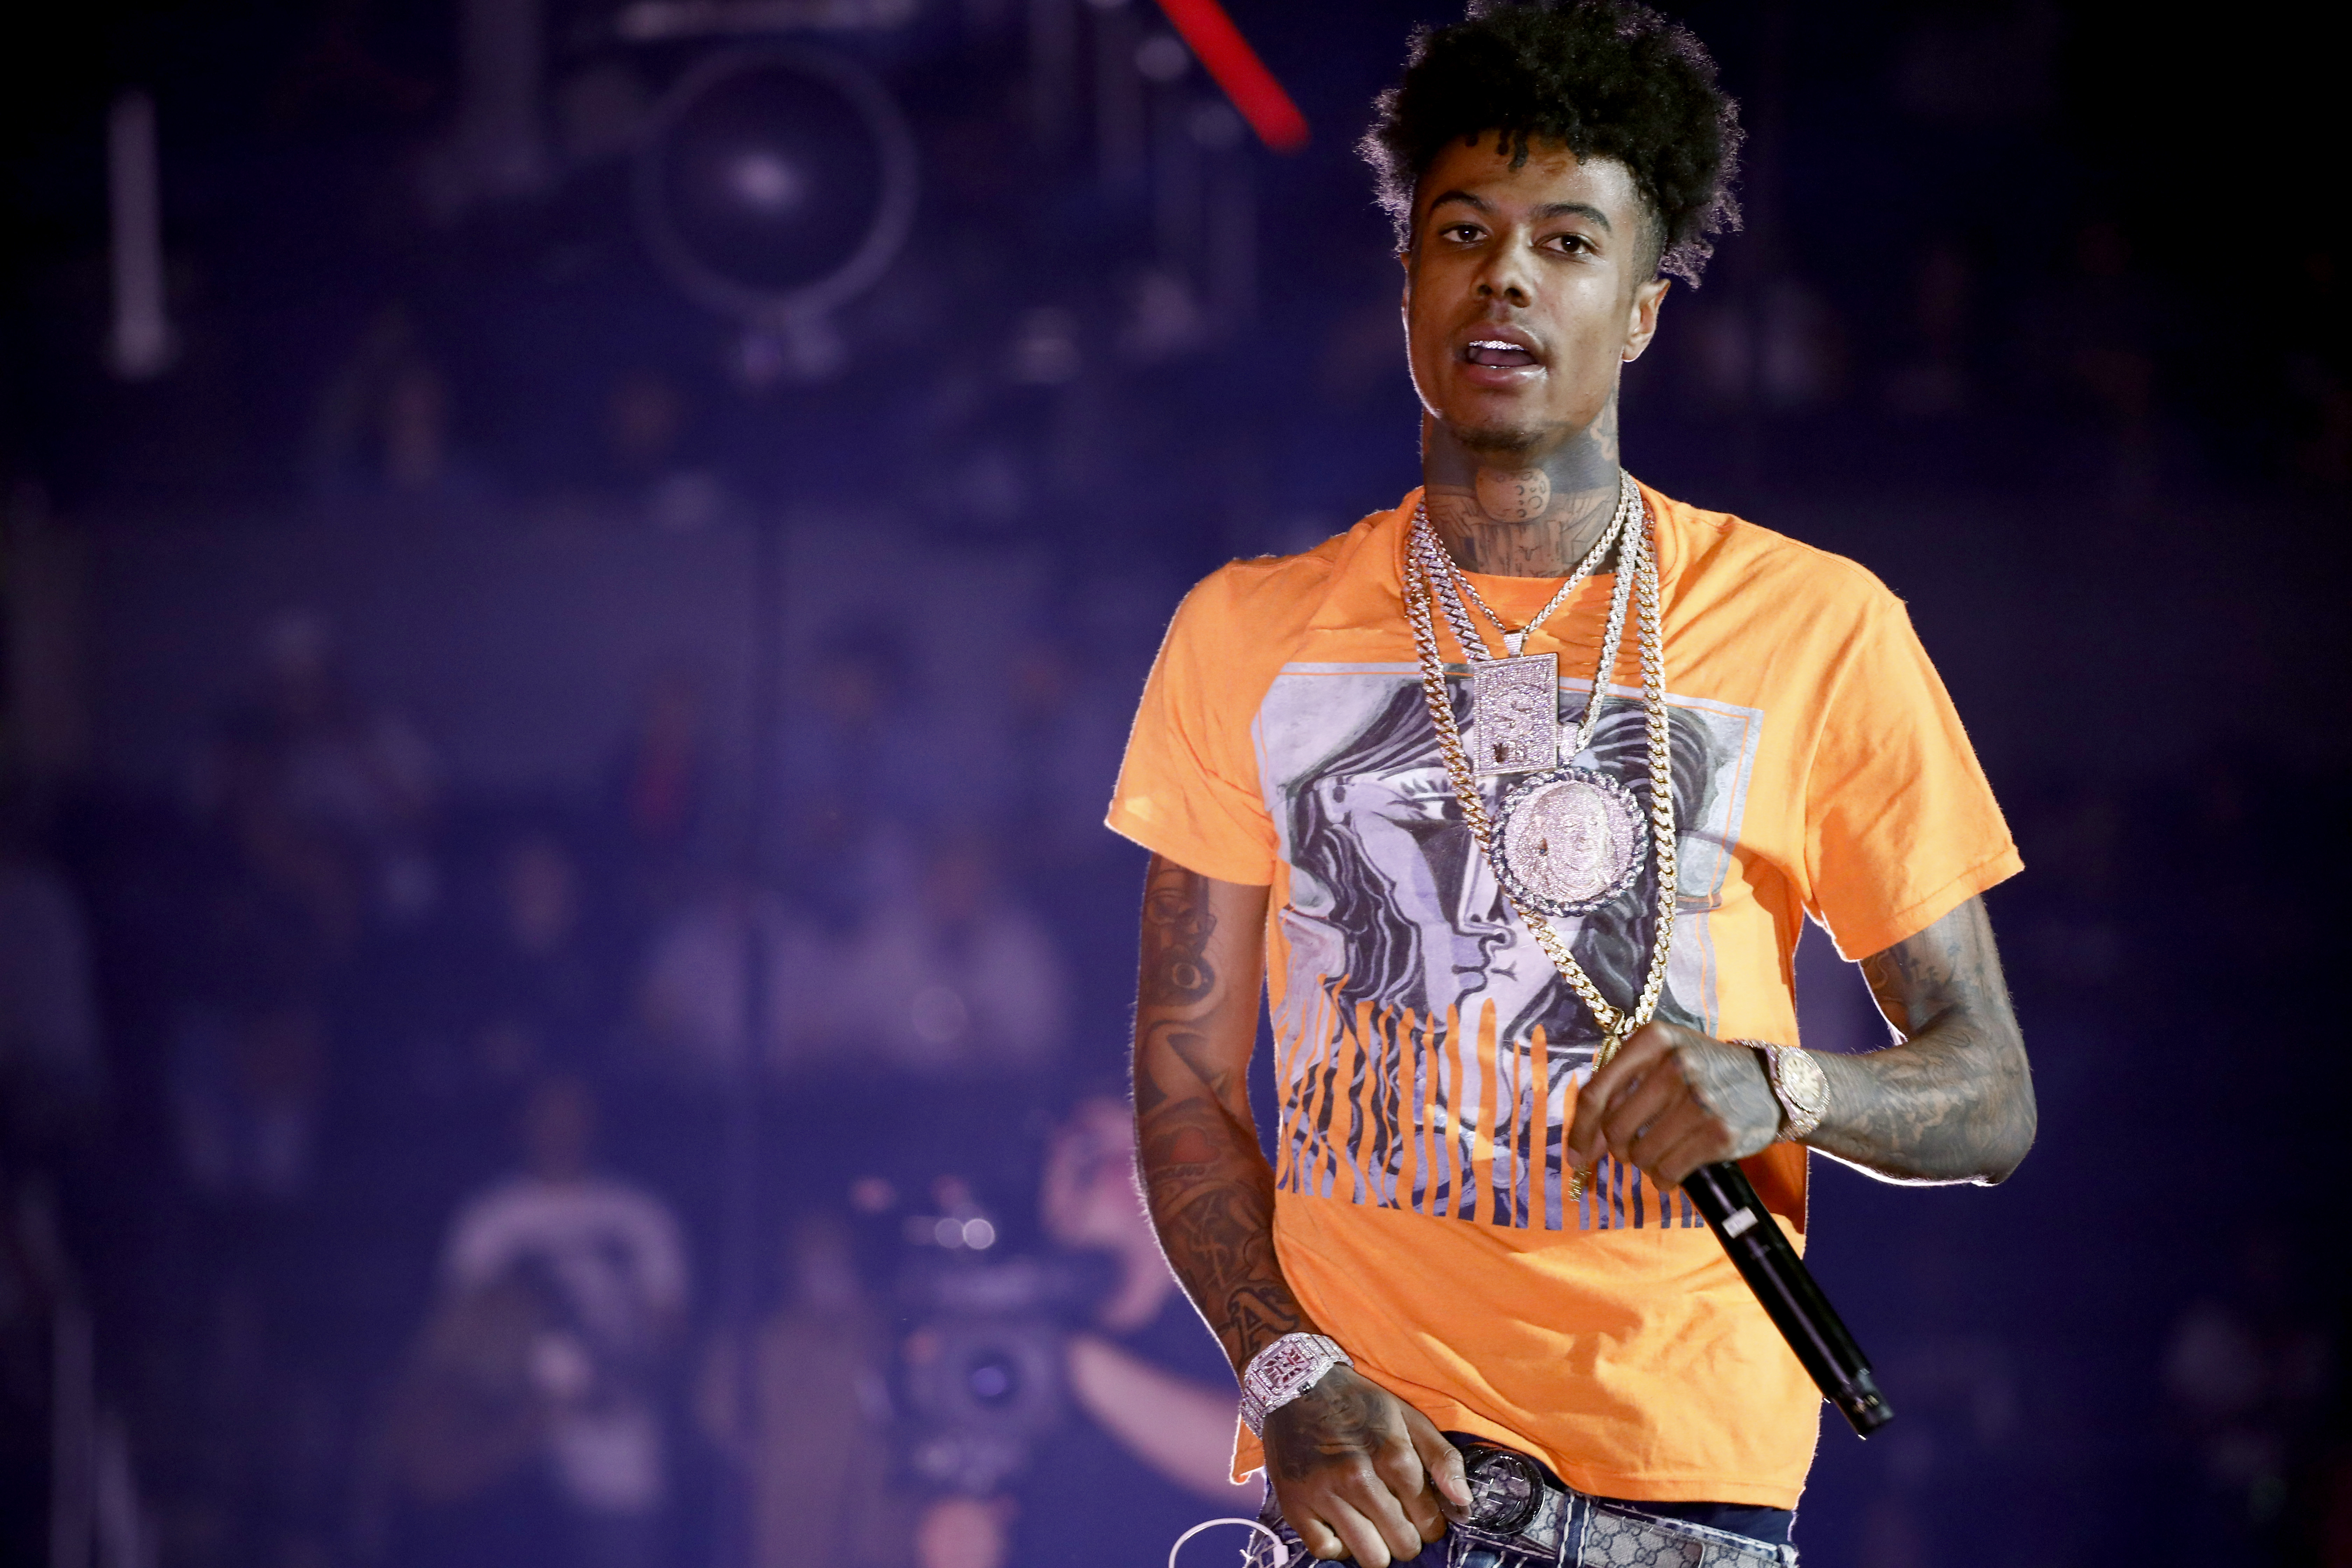 Here Are the Lyrics to Blueface's "Thotiana"